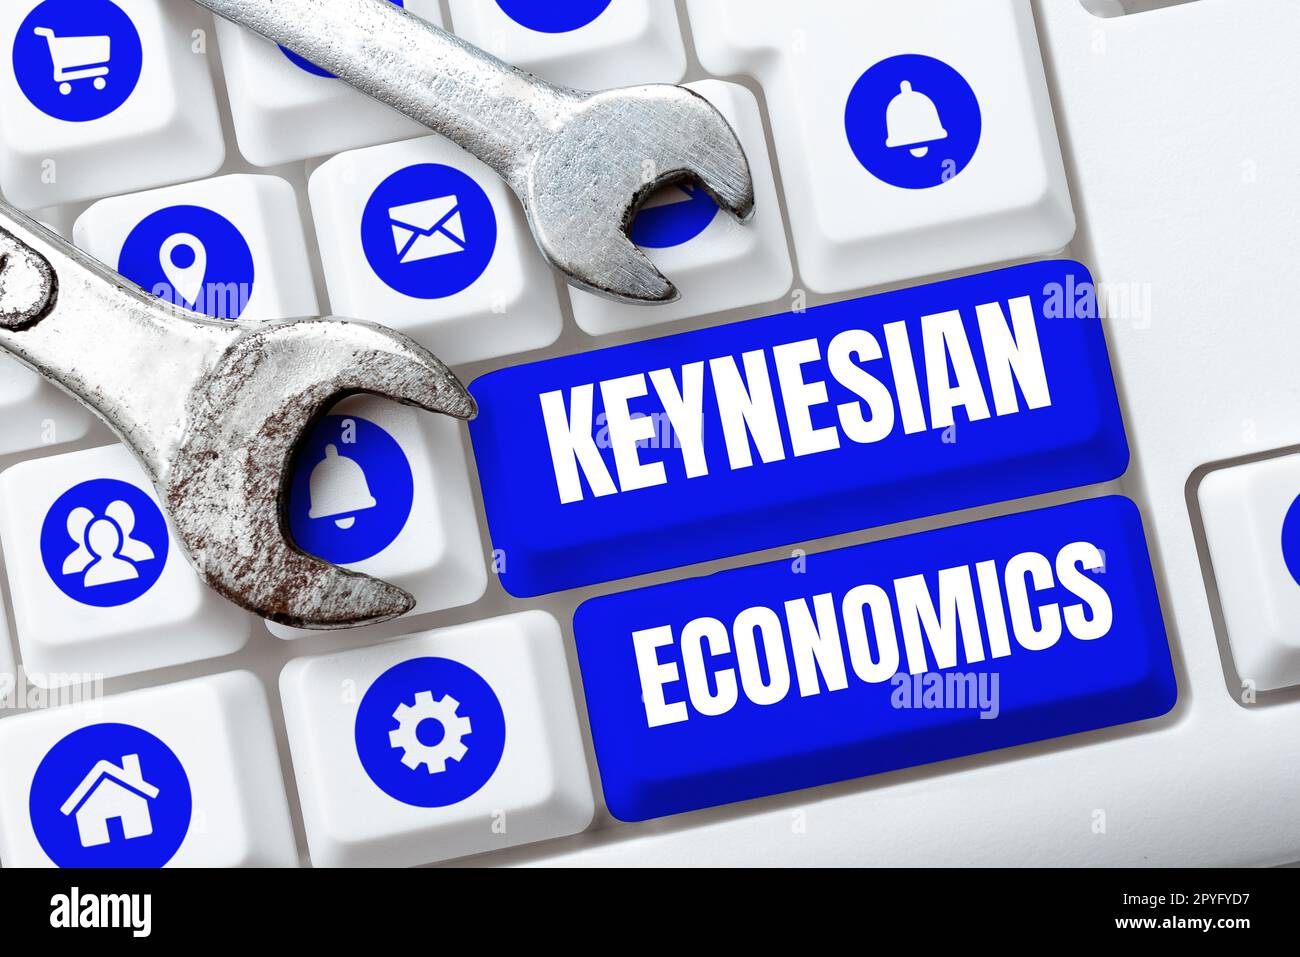 Text sign showing Keynesian Economics. Concept meaning monetary and fiscal programs by government to increase employment Stock Photo